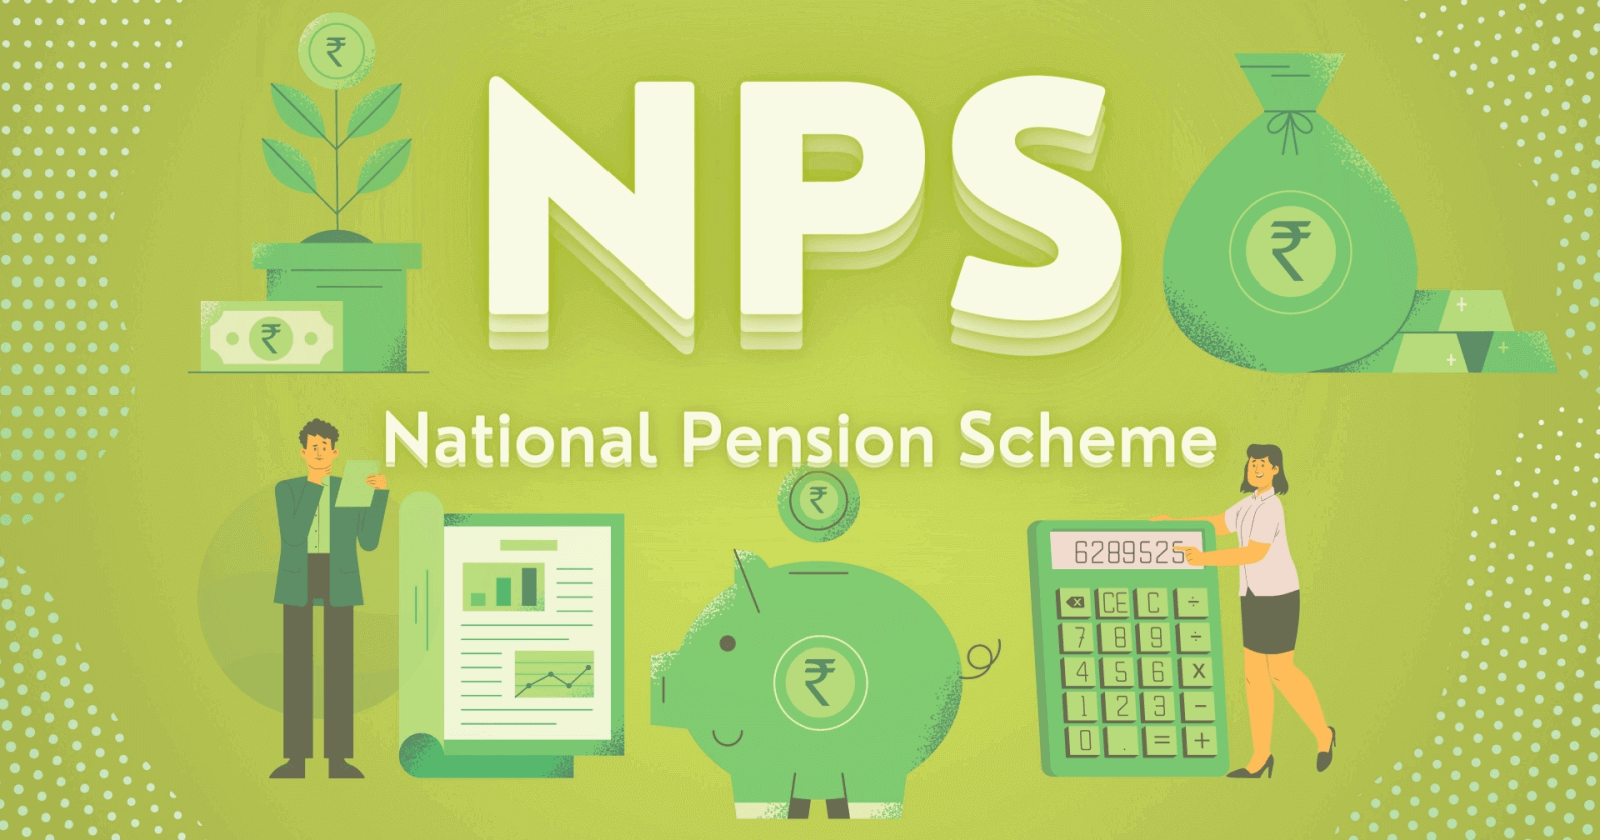 What is the National Pension Scheme